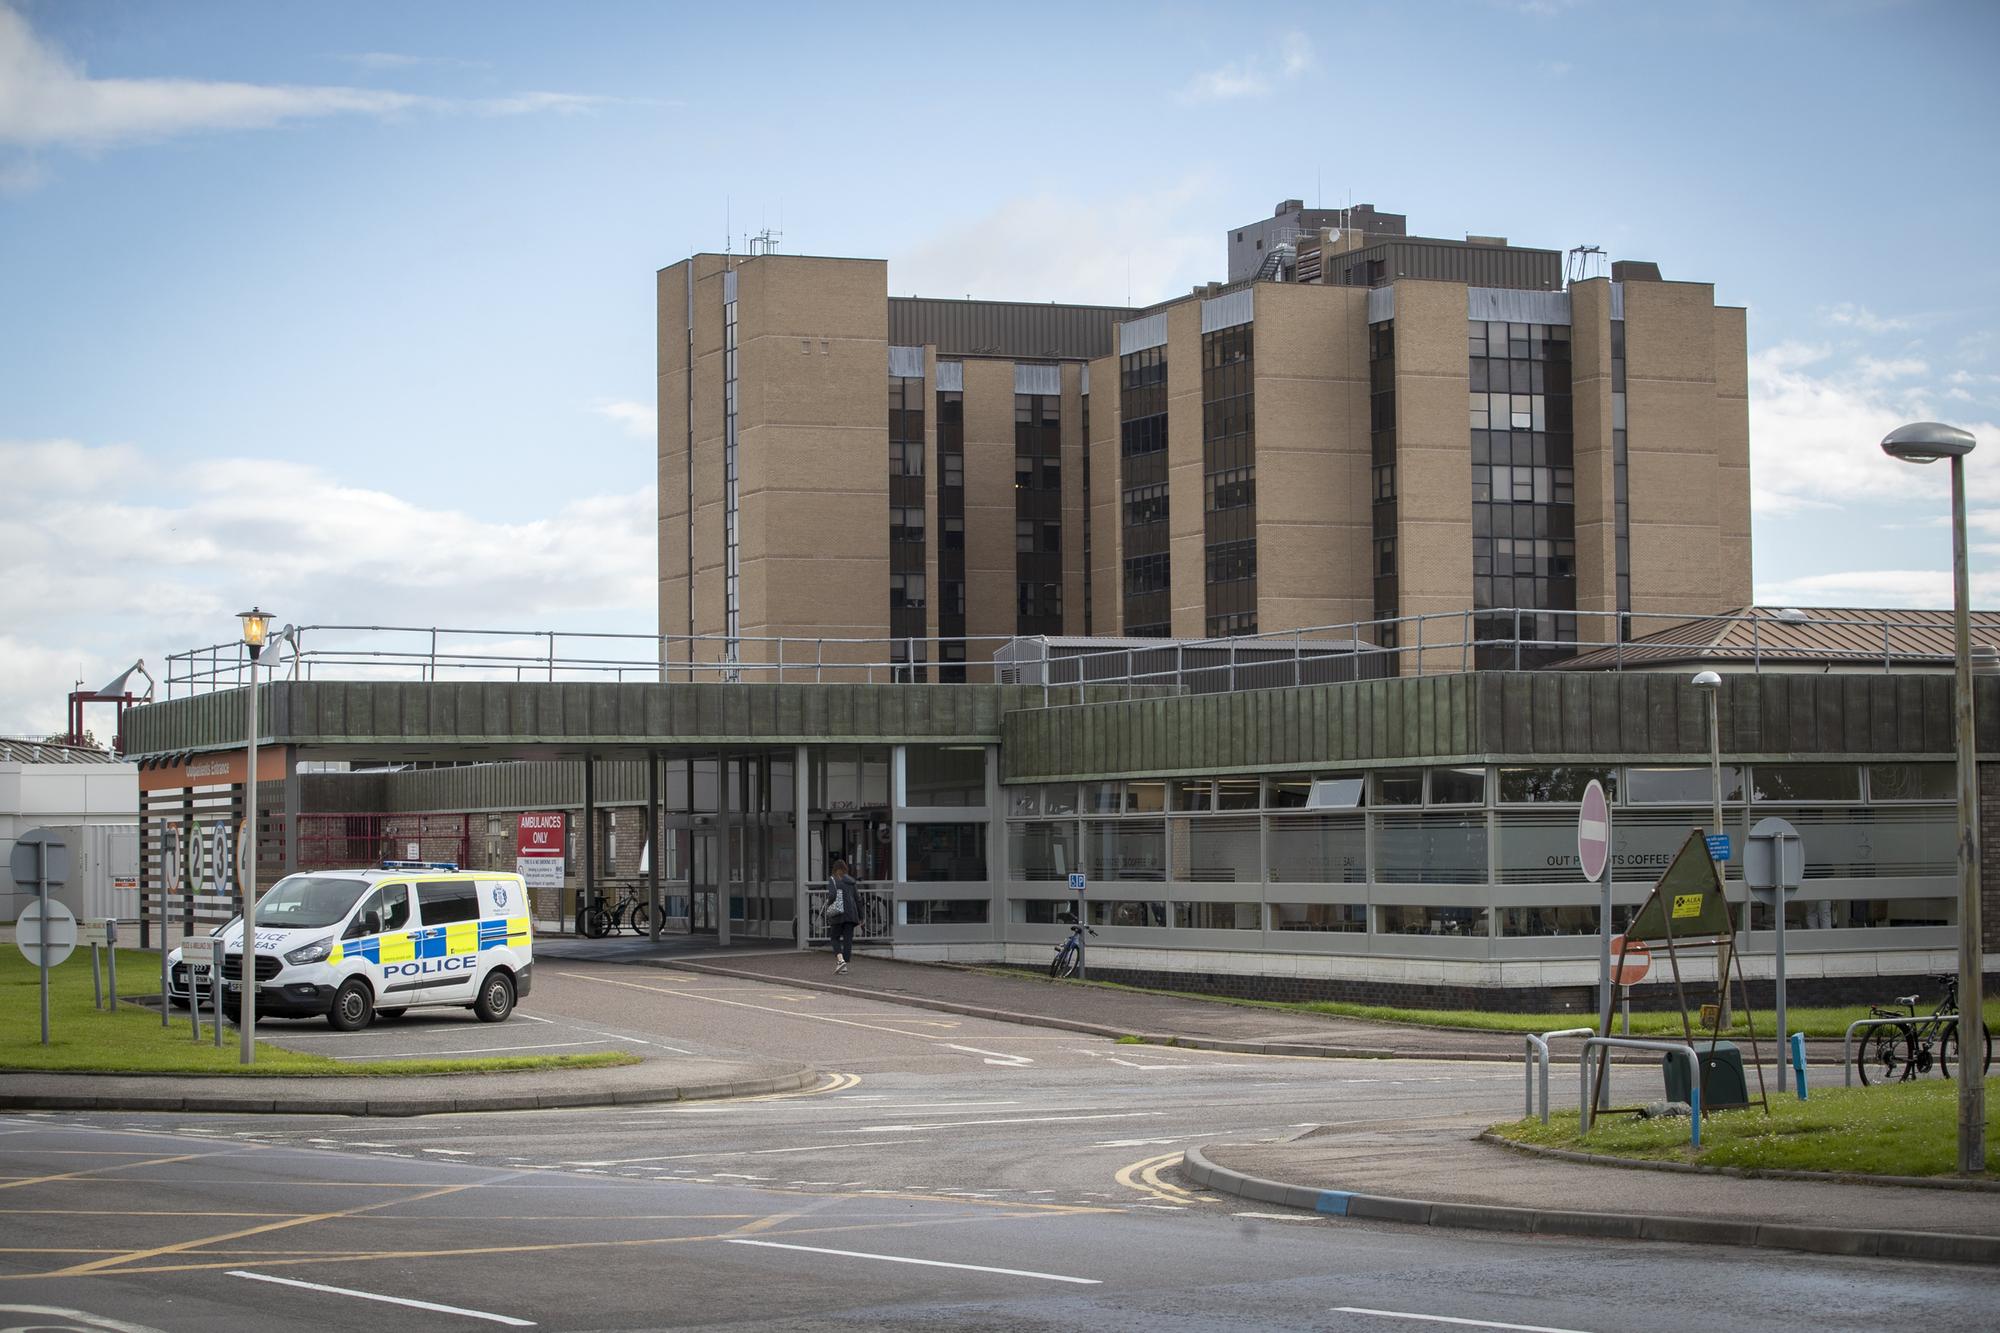 nhs scotland: all new building projects put on hold as money runs out